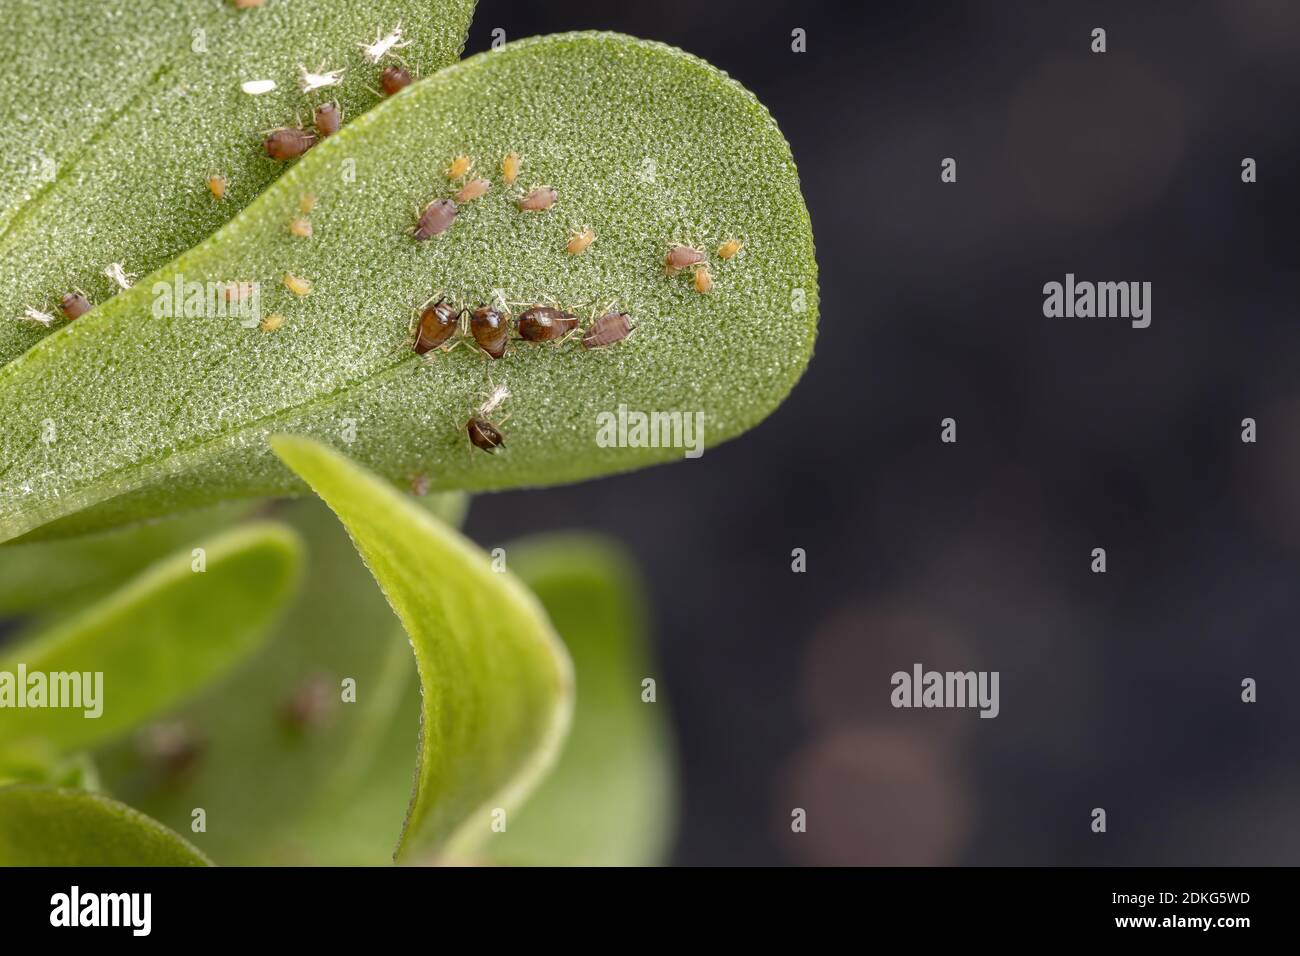 Brown Citrus Aphids of the species Toxoptera citricida eating the Common Purslane plant of the species Portulaca oleracea Stock Photo